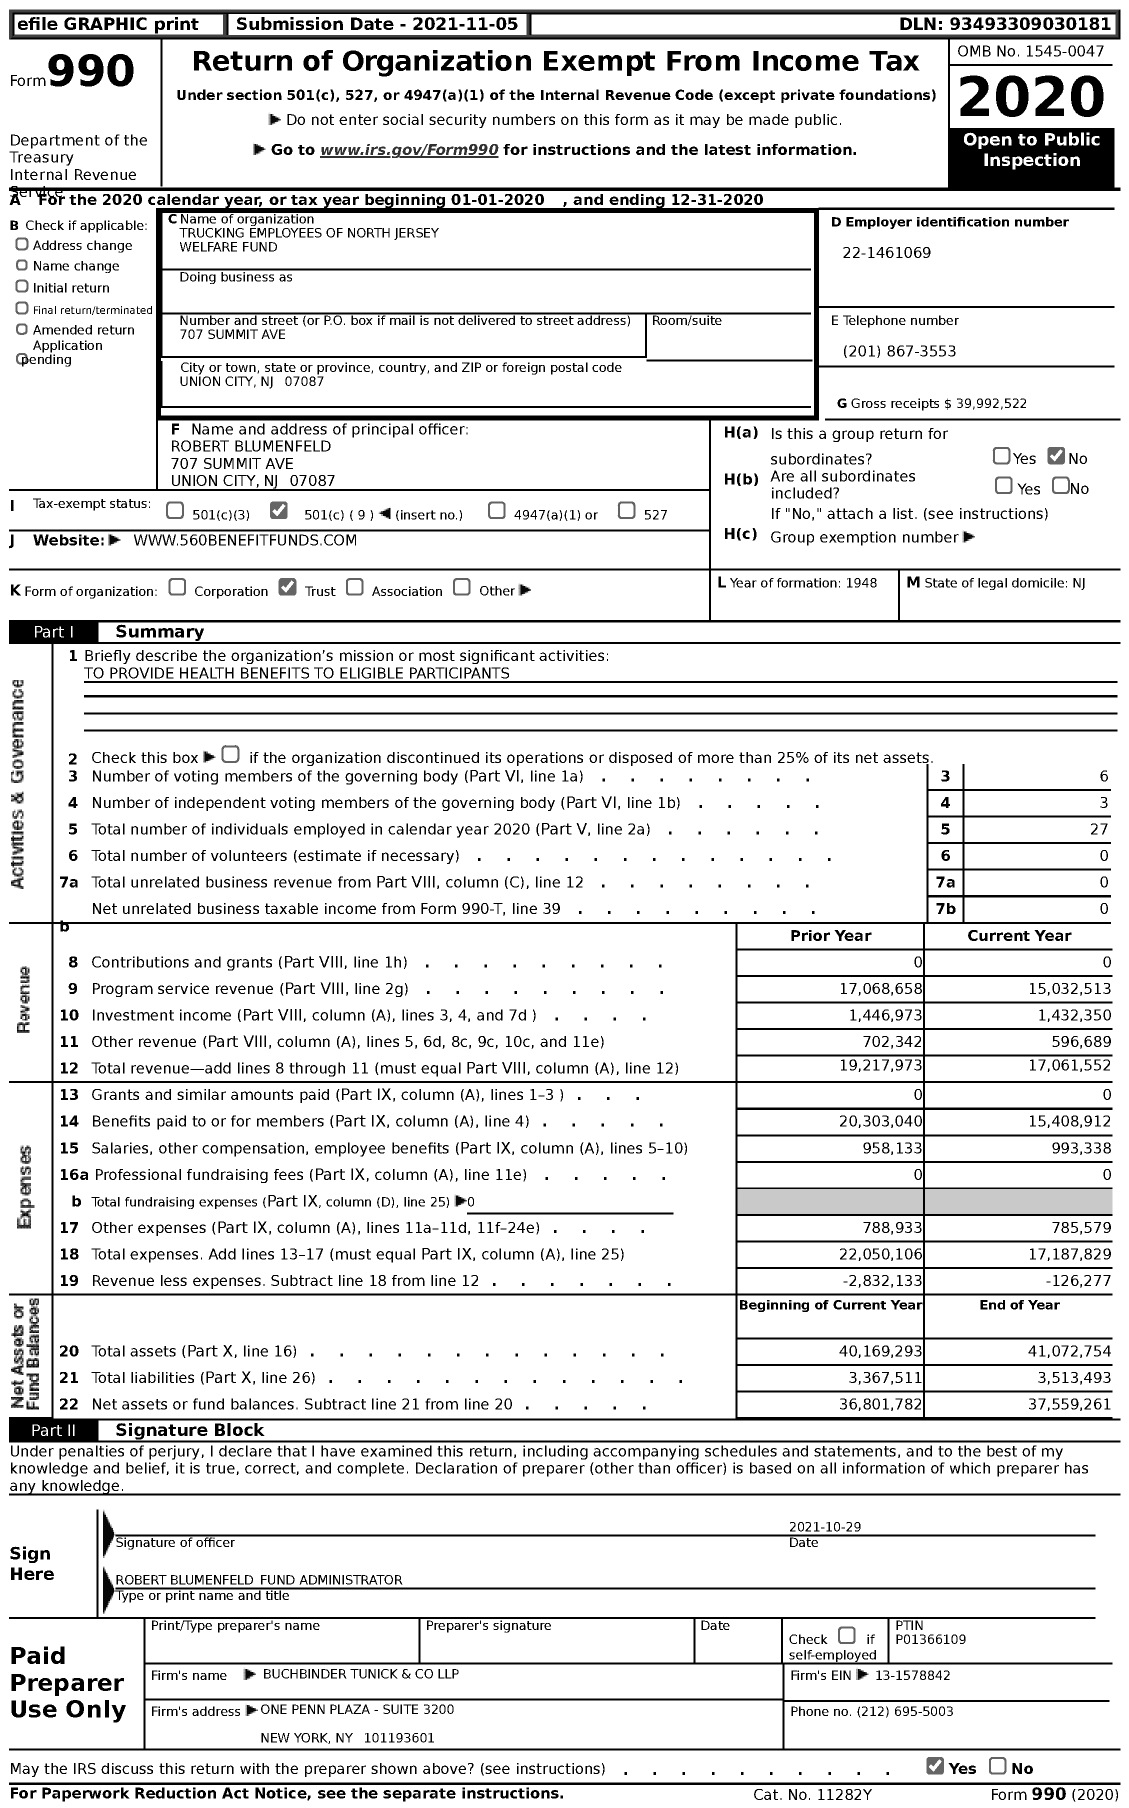 Image of first page of 2020 Form 990 for Trucking Employees of North Jersey Welfare Fund